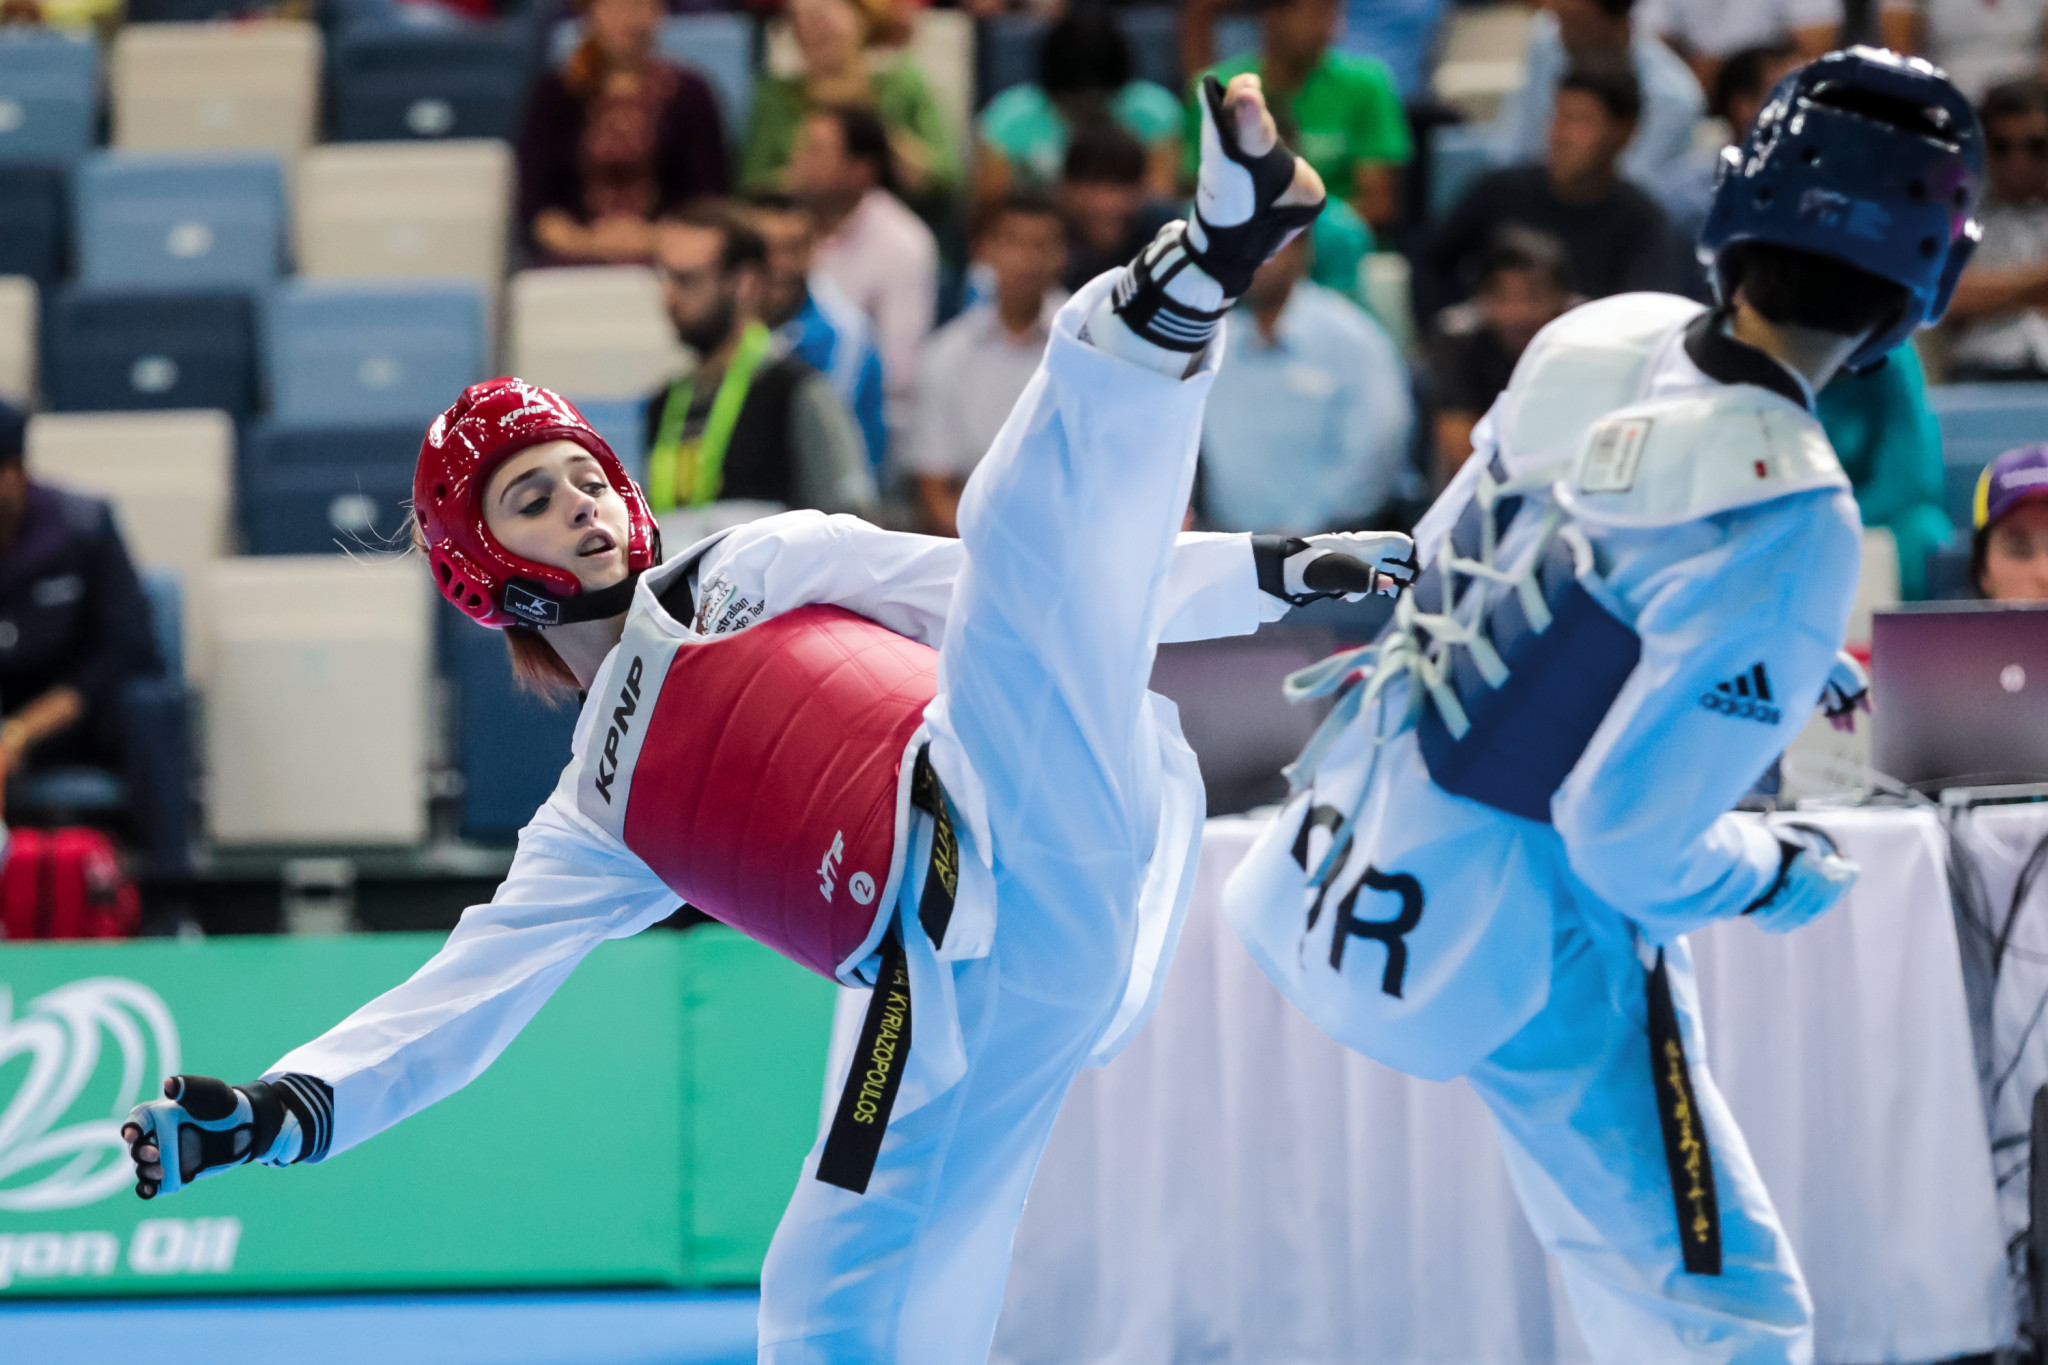 Deanna Kyriazopoulos was one of six taekwondo players to represnet Australia at the Asian Indoor and Martial Arts Games in Ashgabat last month ©Ashgabat 2017